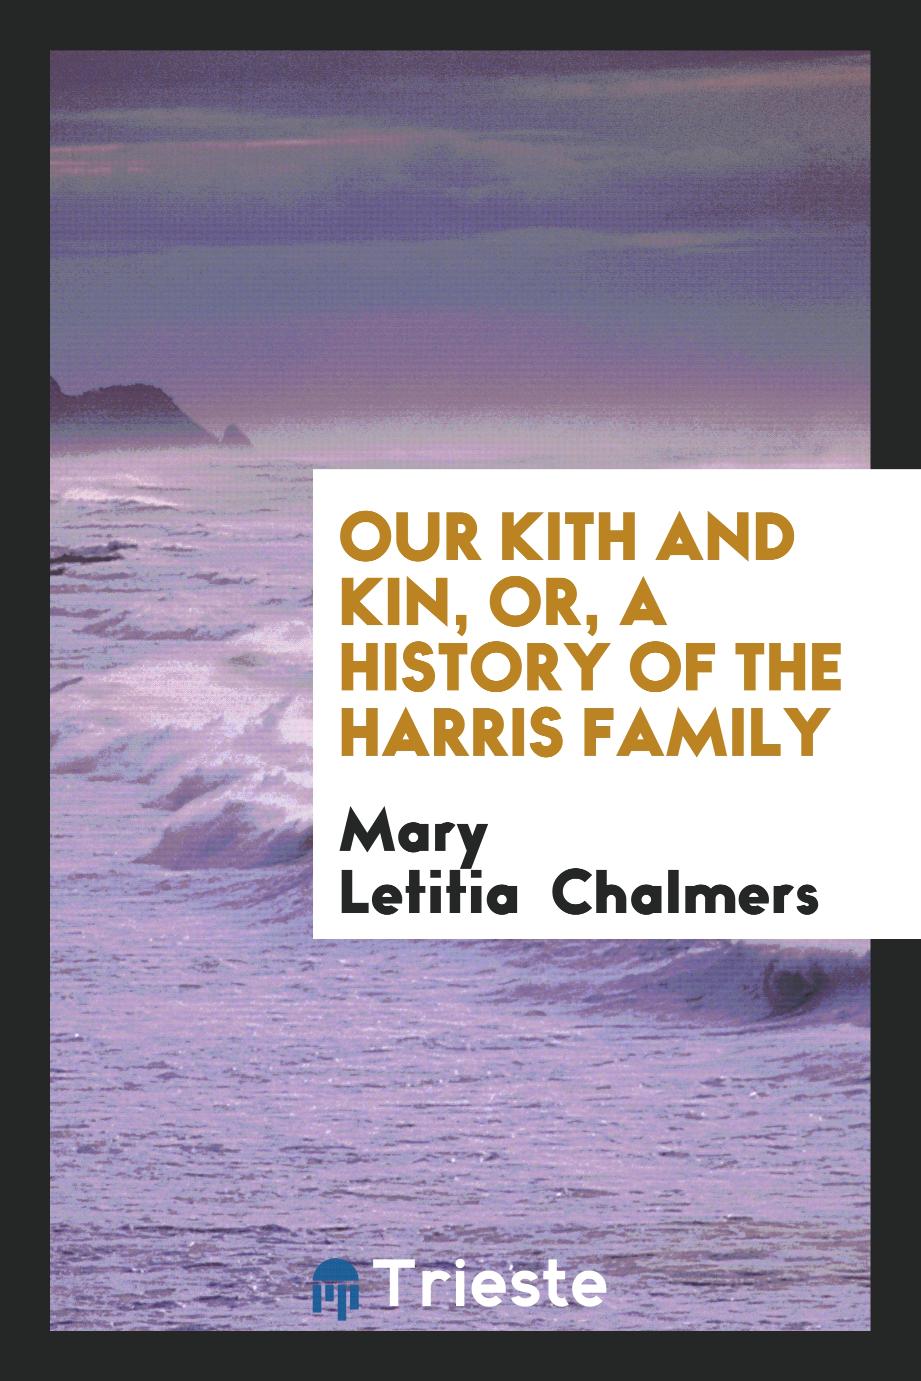 Our kith and kin, or, A history of the Harris family